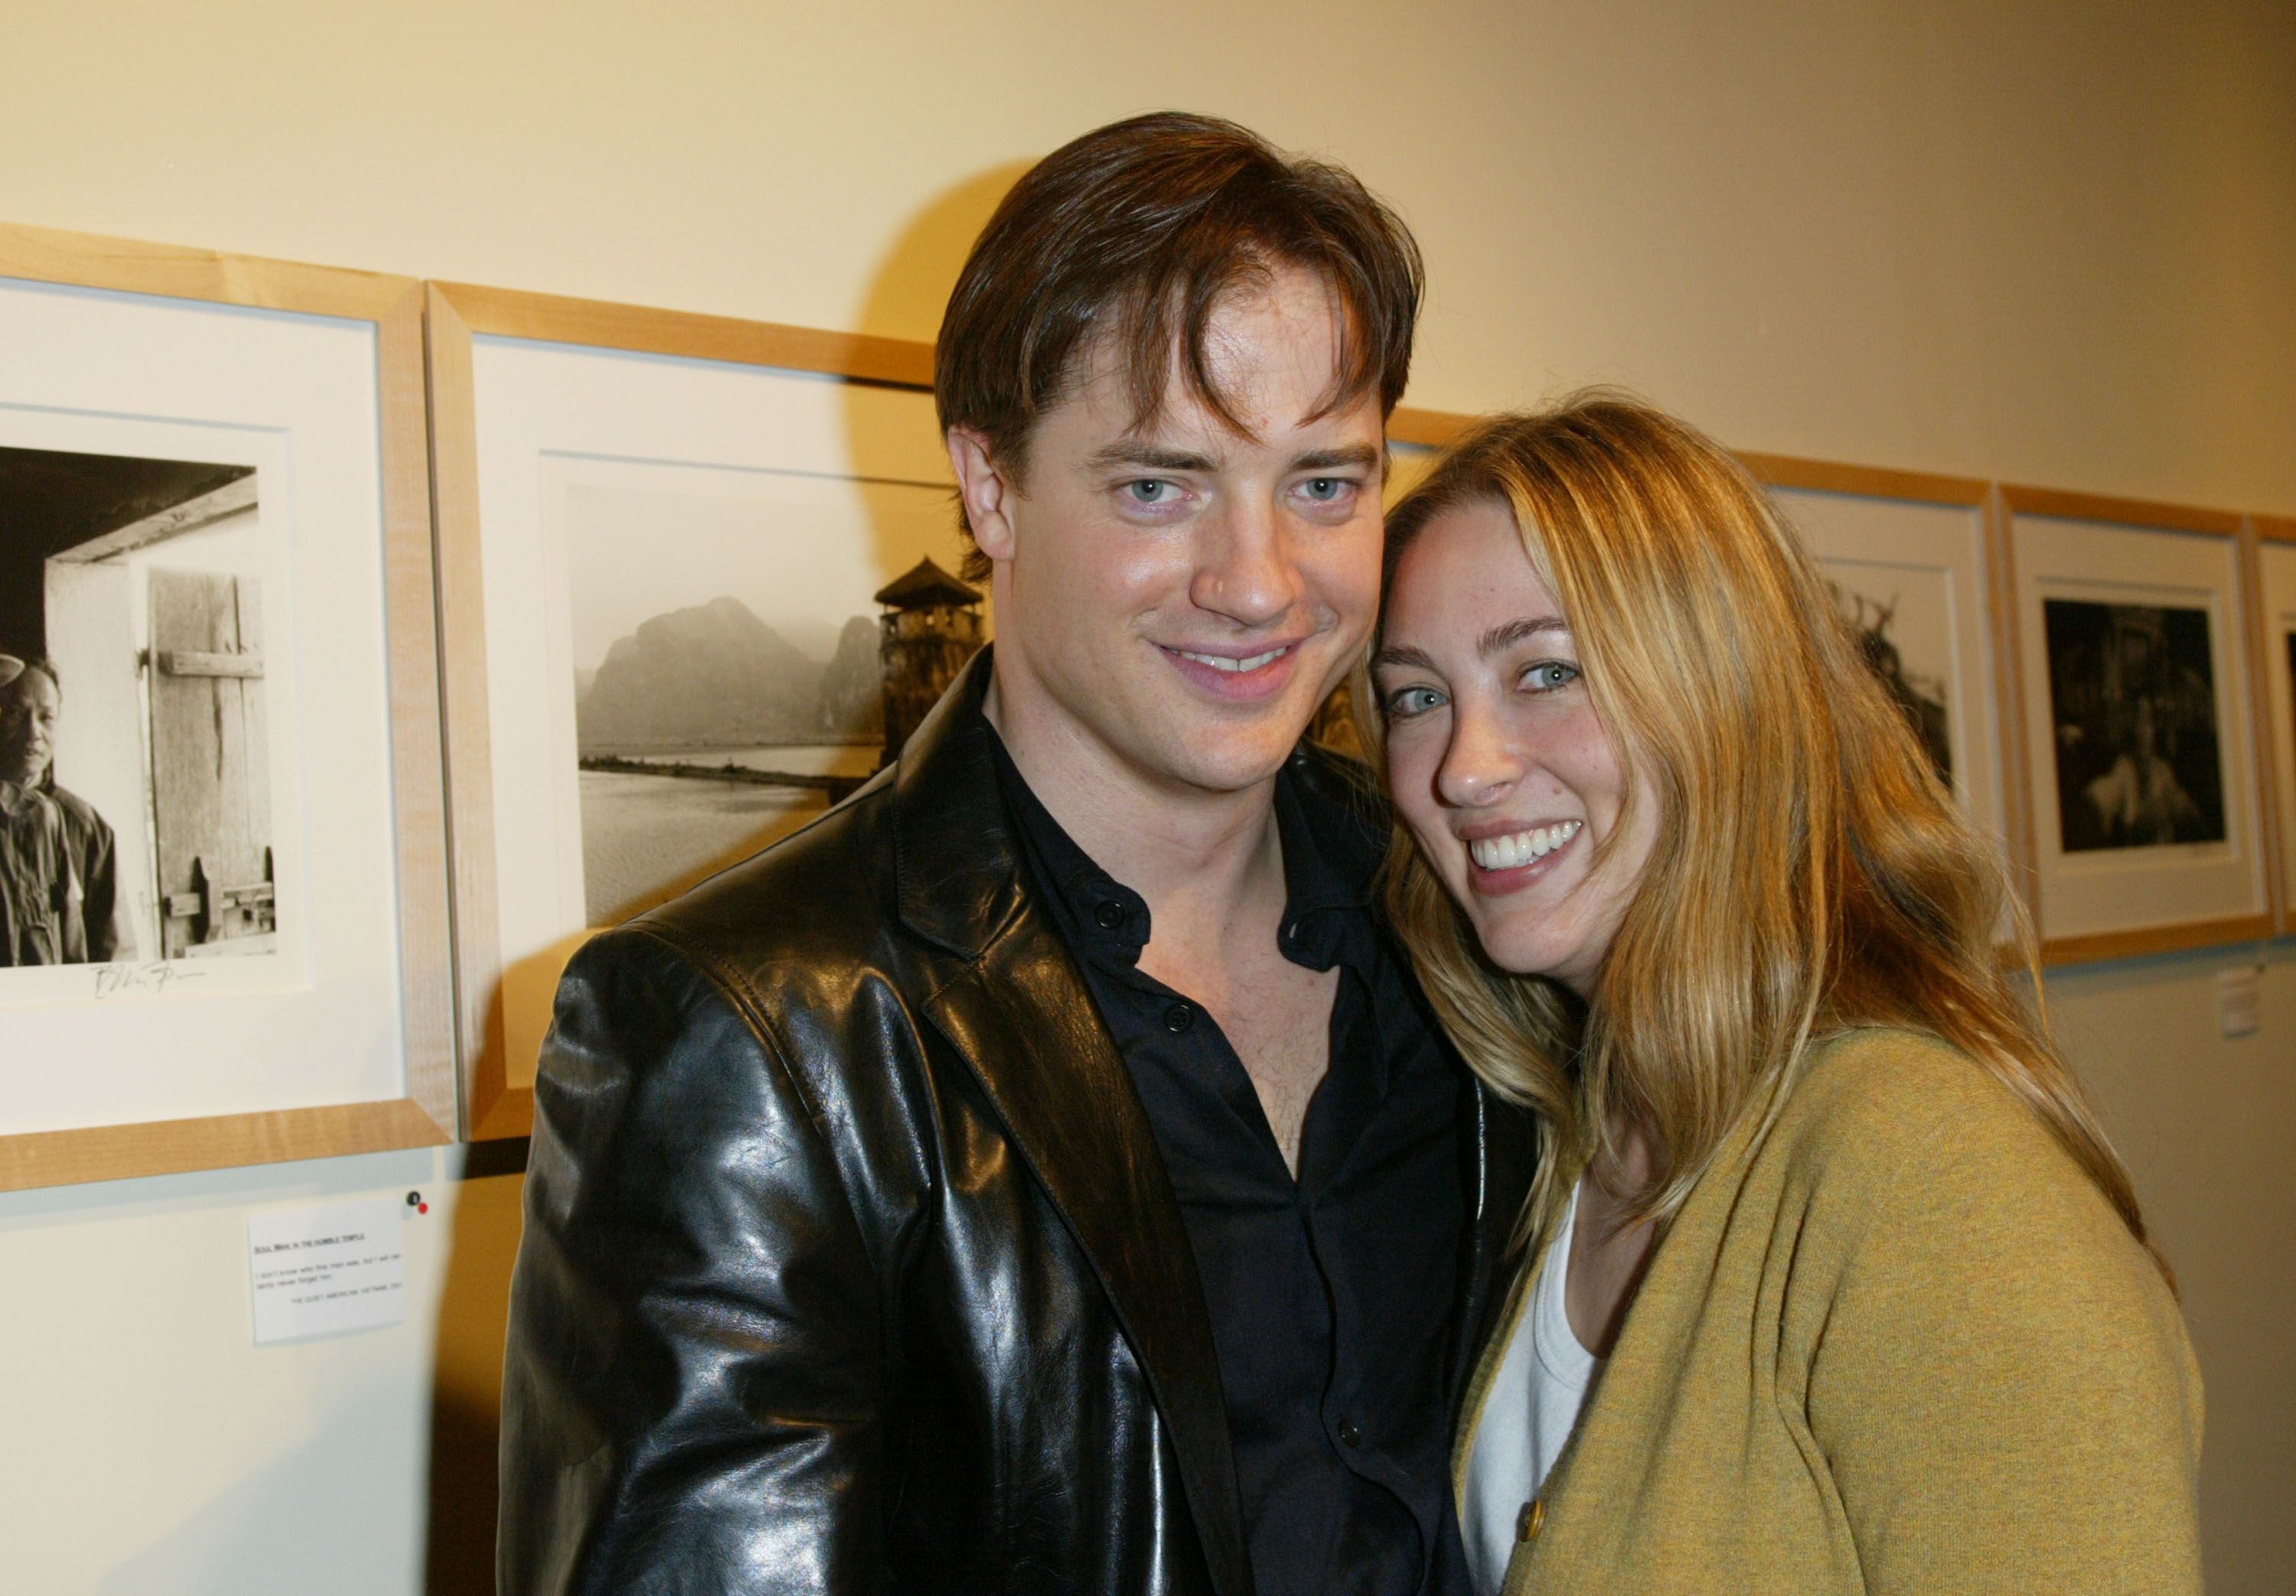 Brendan Fraser and Afton Smith during Opening Night Exhibition Of Photographs By Brendan Fraser at 24th Street Theatre in Los Angeles, California | Photo: Getty Images